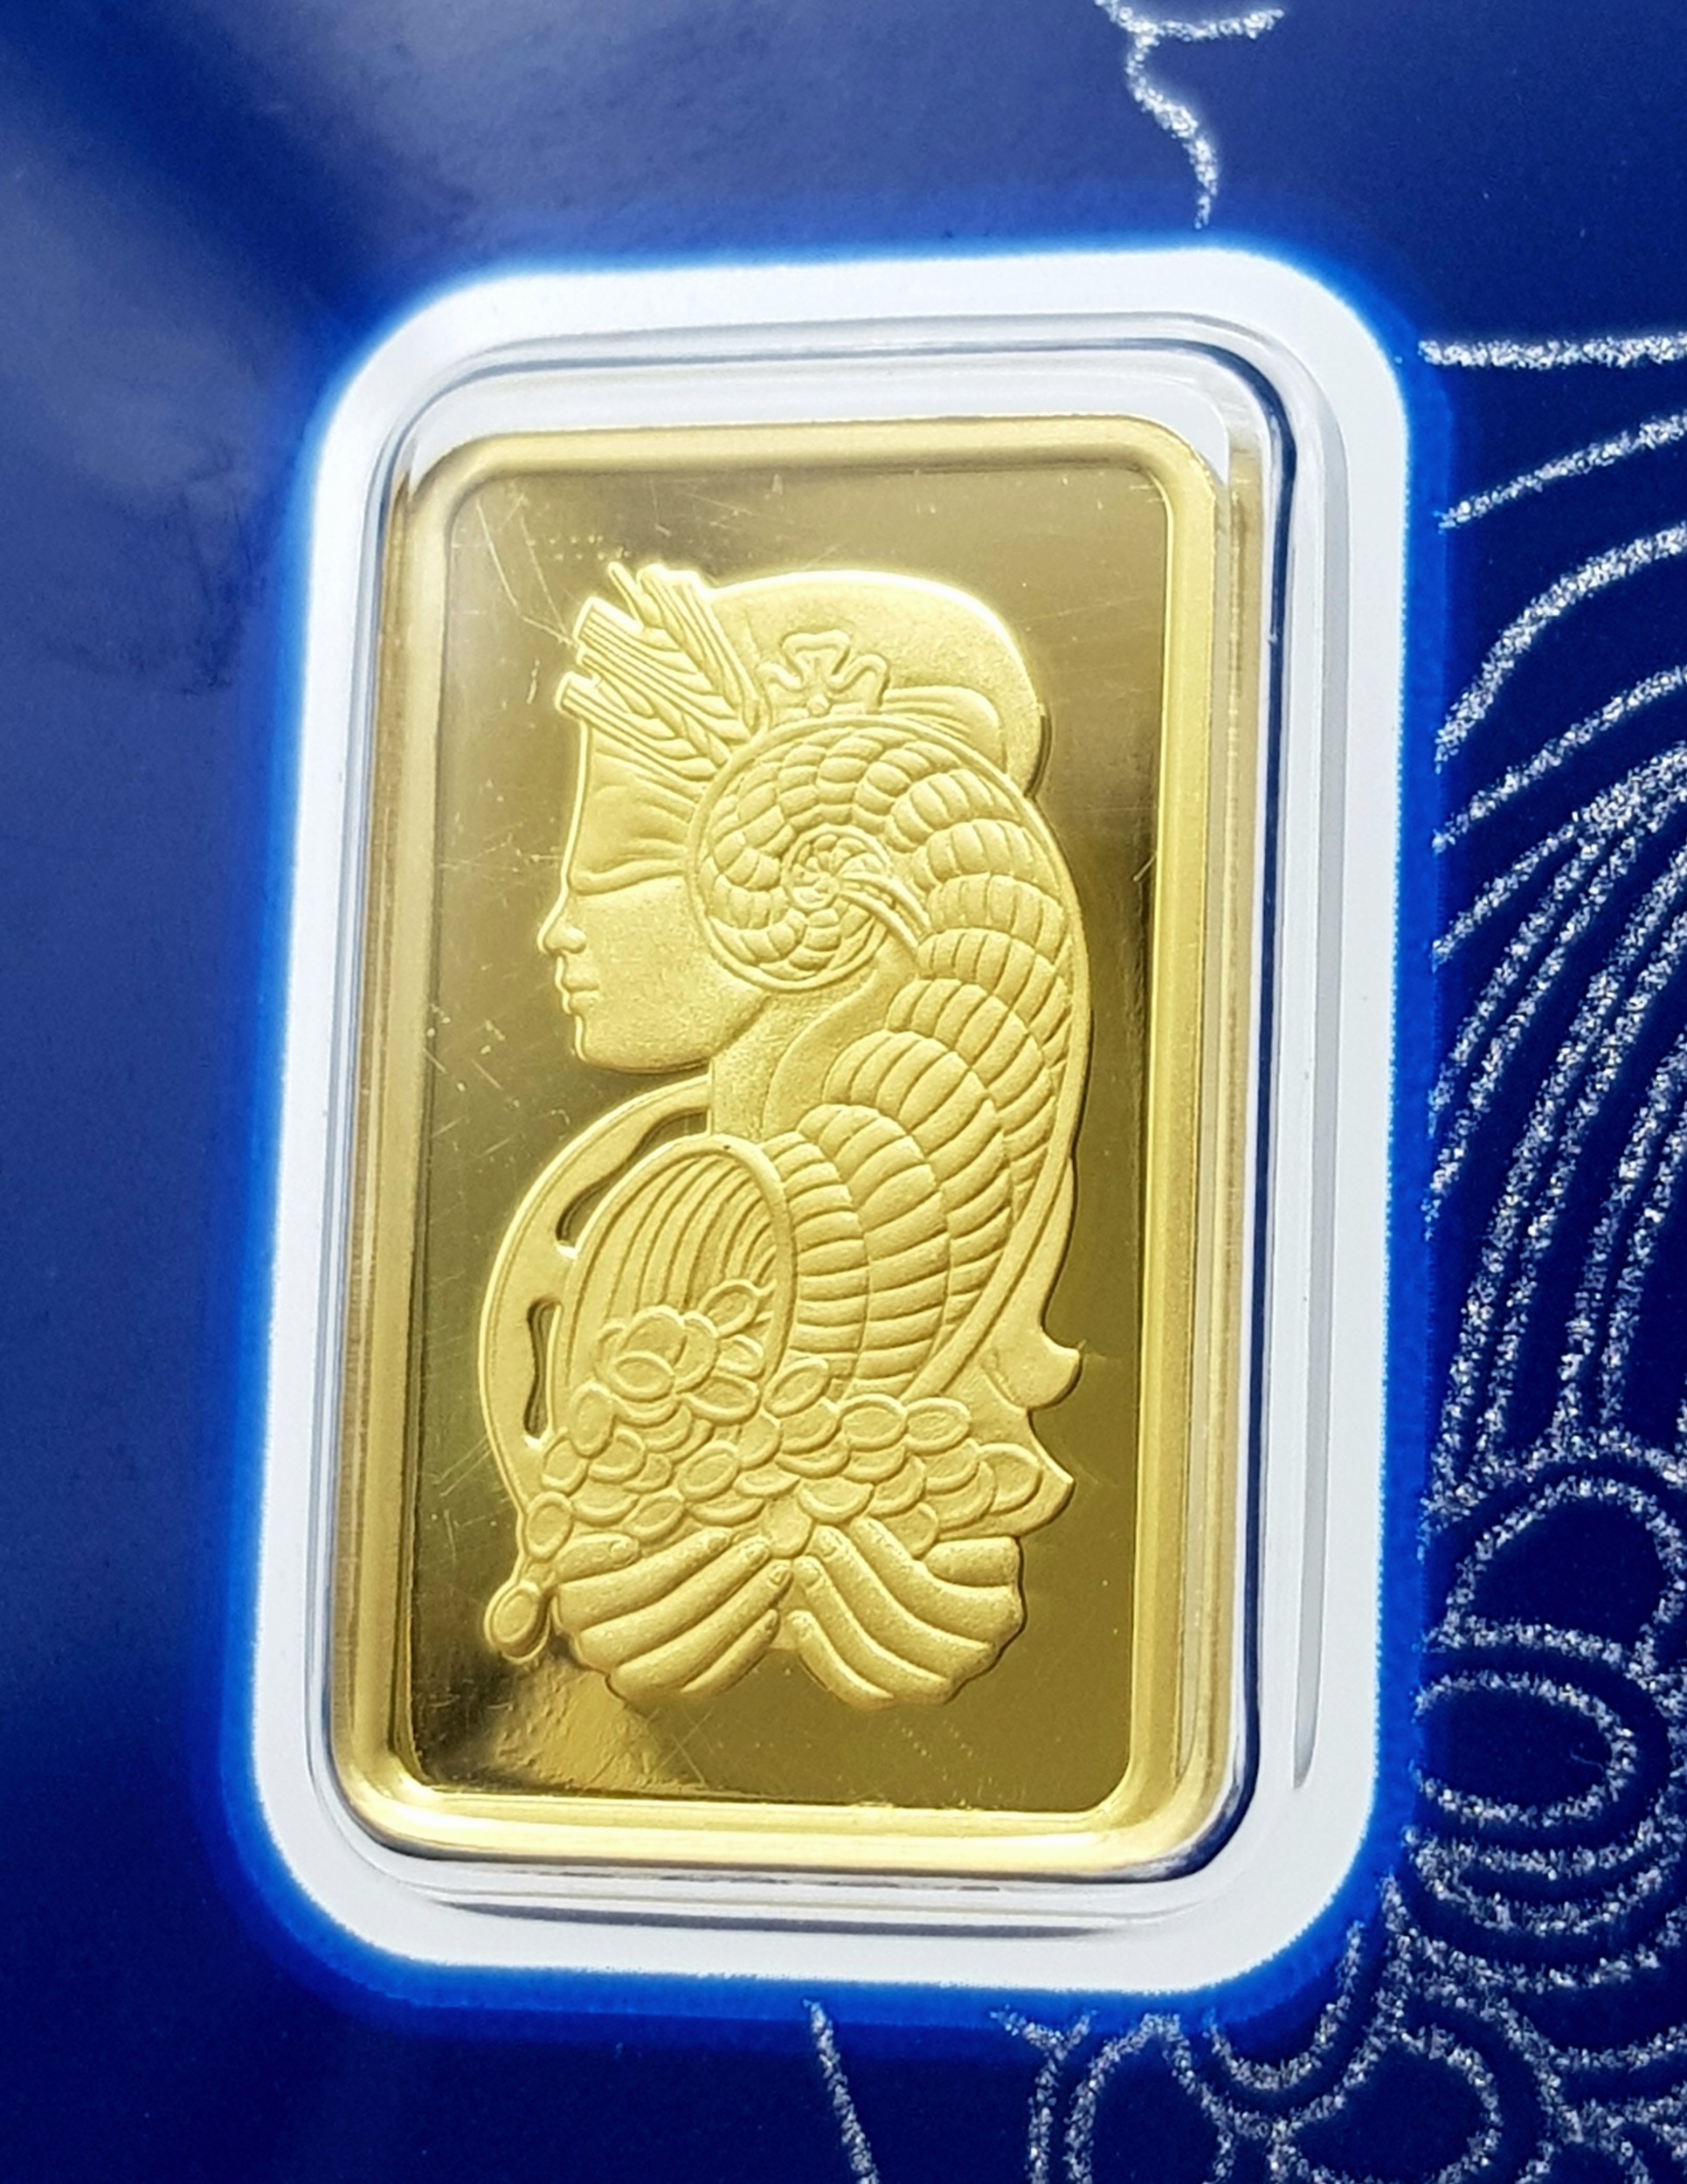 A 2.5g Fine Gold (.999) Swiss Ingot. Comes in a self contained package. - Image 2 of 7